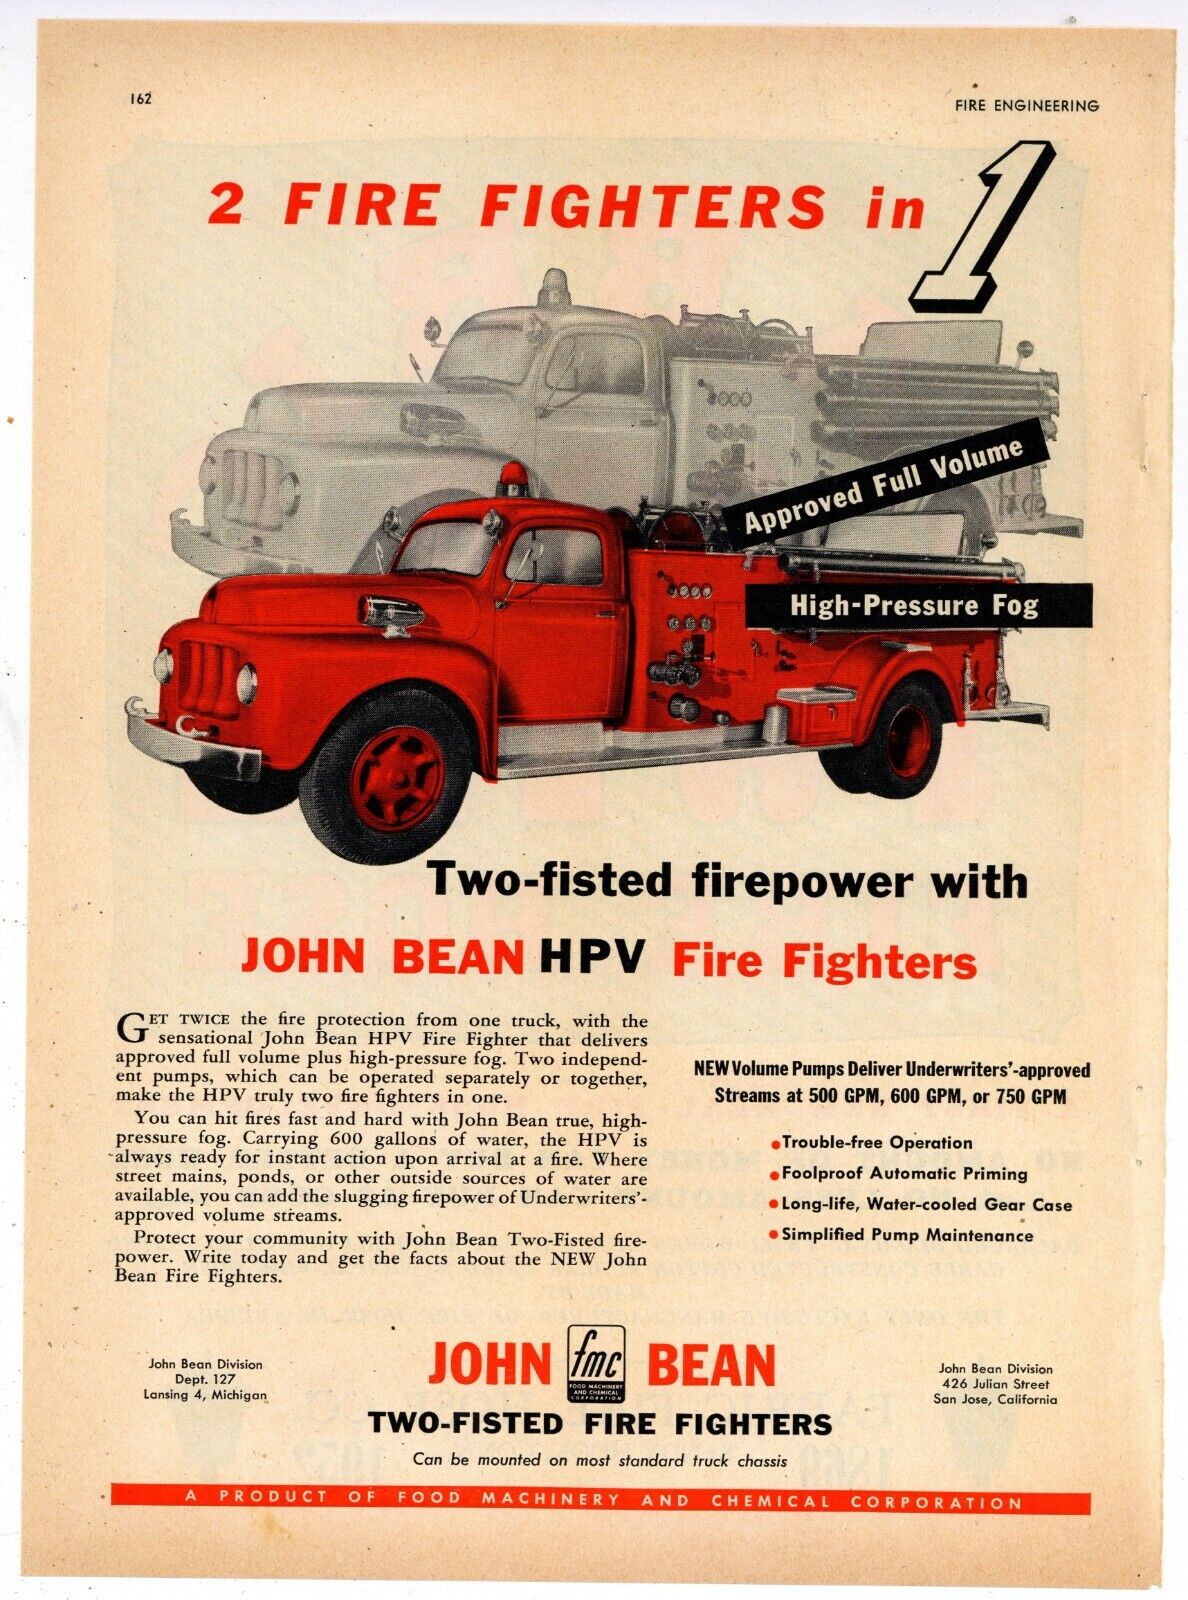 1952 John Bean FMC HPV Fire Fighters Ad: Ford Fire Truck Pictured - Lansing, MI